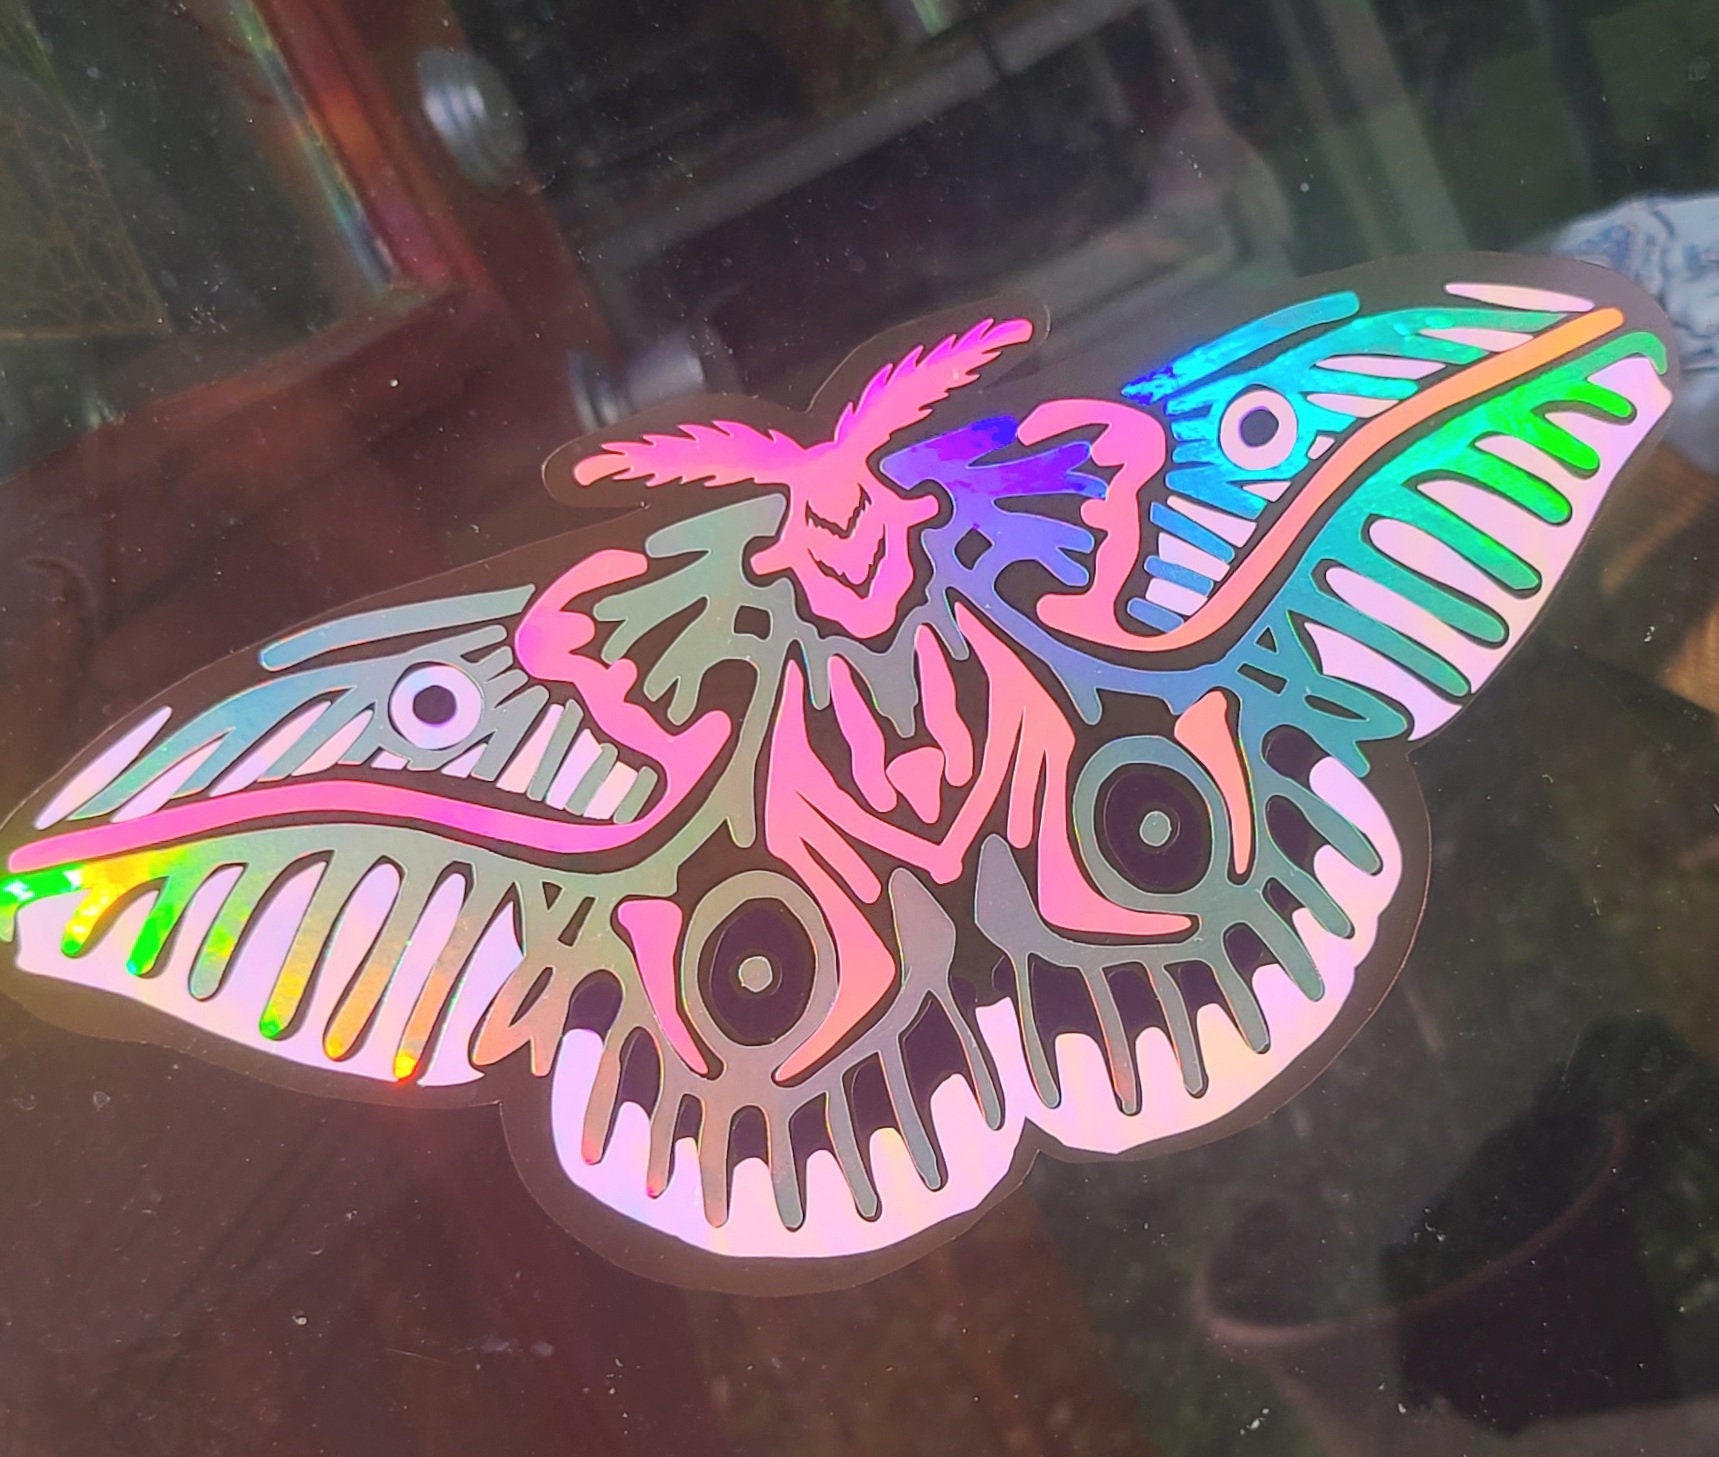 Translucent Pink Moth Holographic Window Film Decal // 10 inches